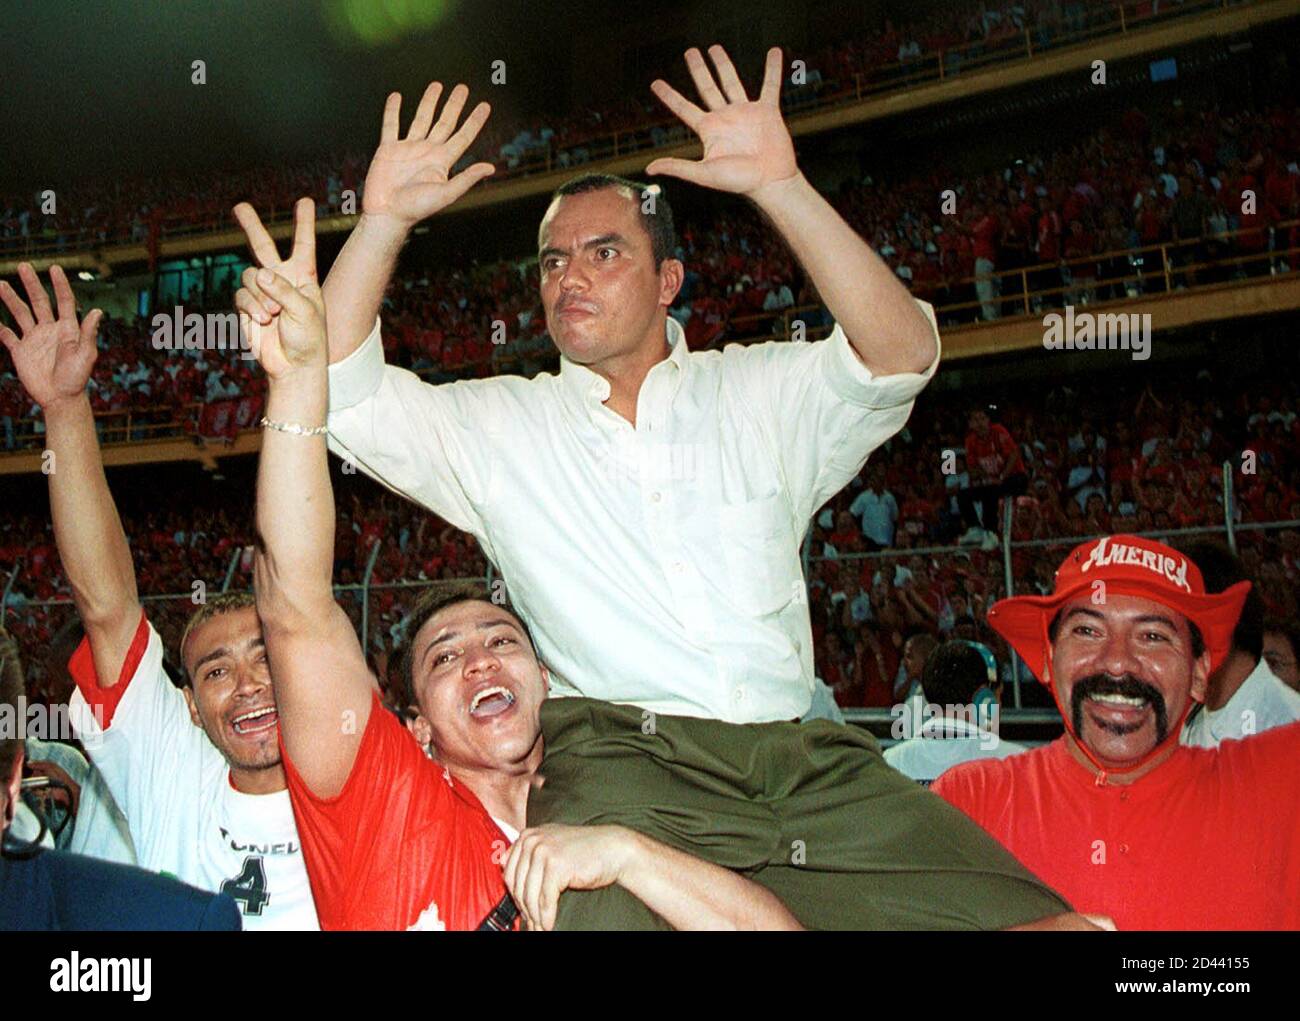 America's coach Jaime de la Pava is carried on the shoulders of fans after  beating Deportes Tolima during the final match of the Colombian soccer  league, December 17, 2000. America defeated Tolima